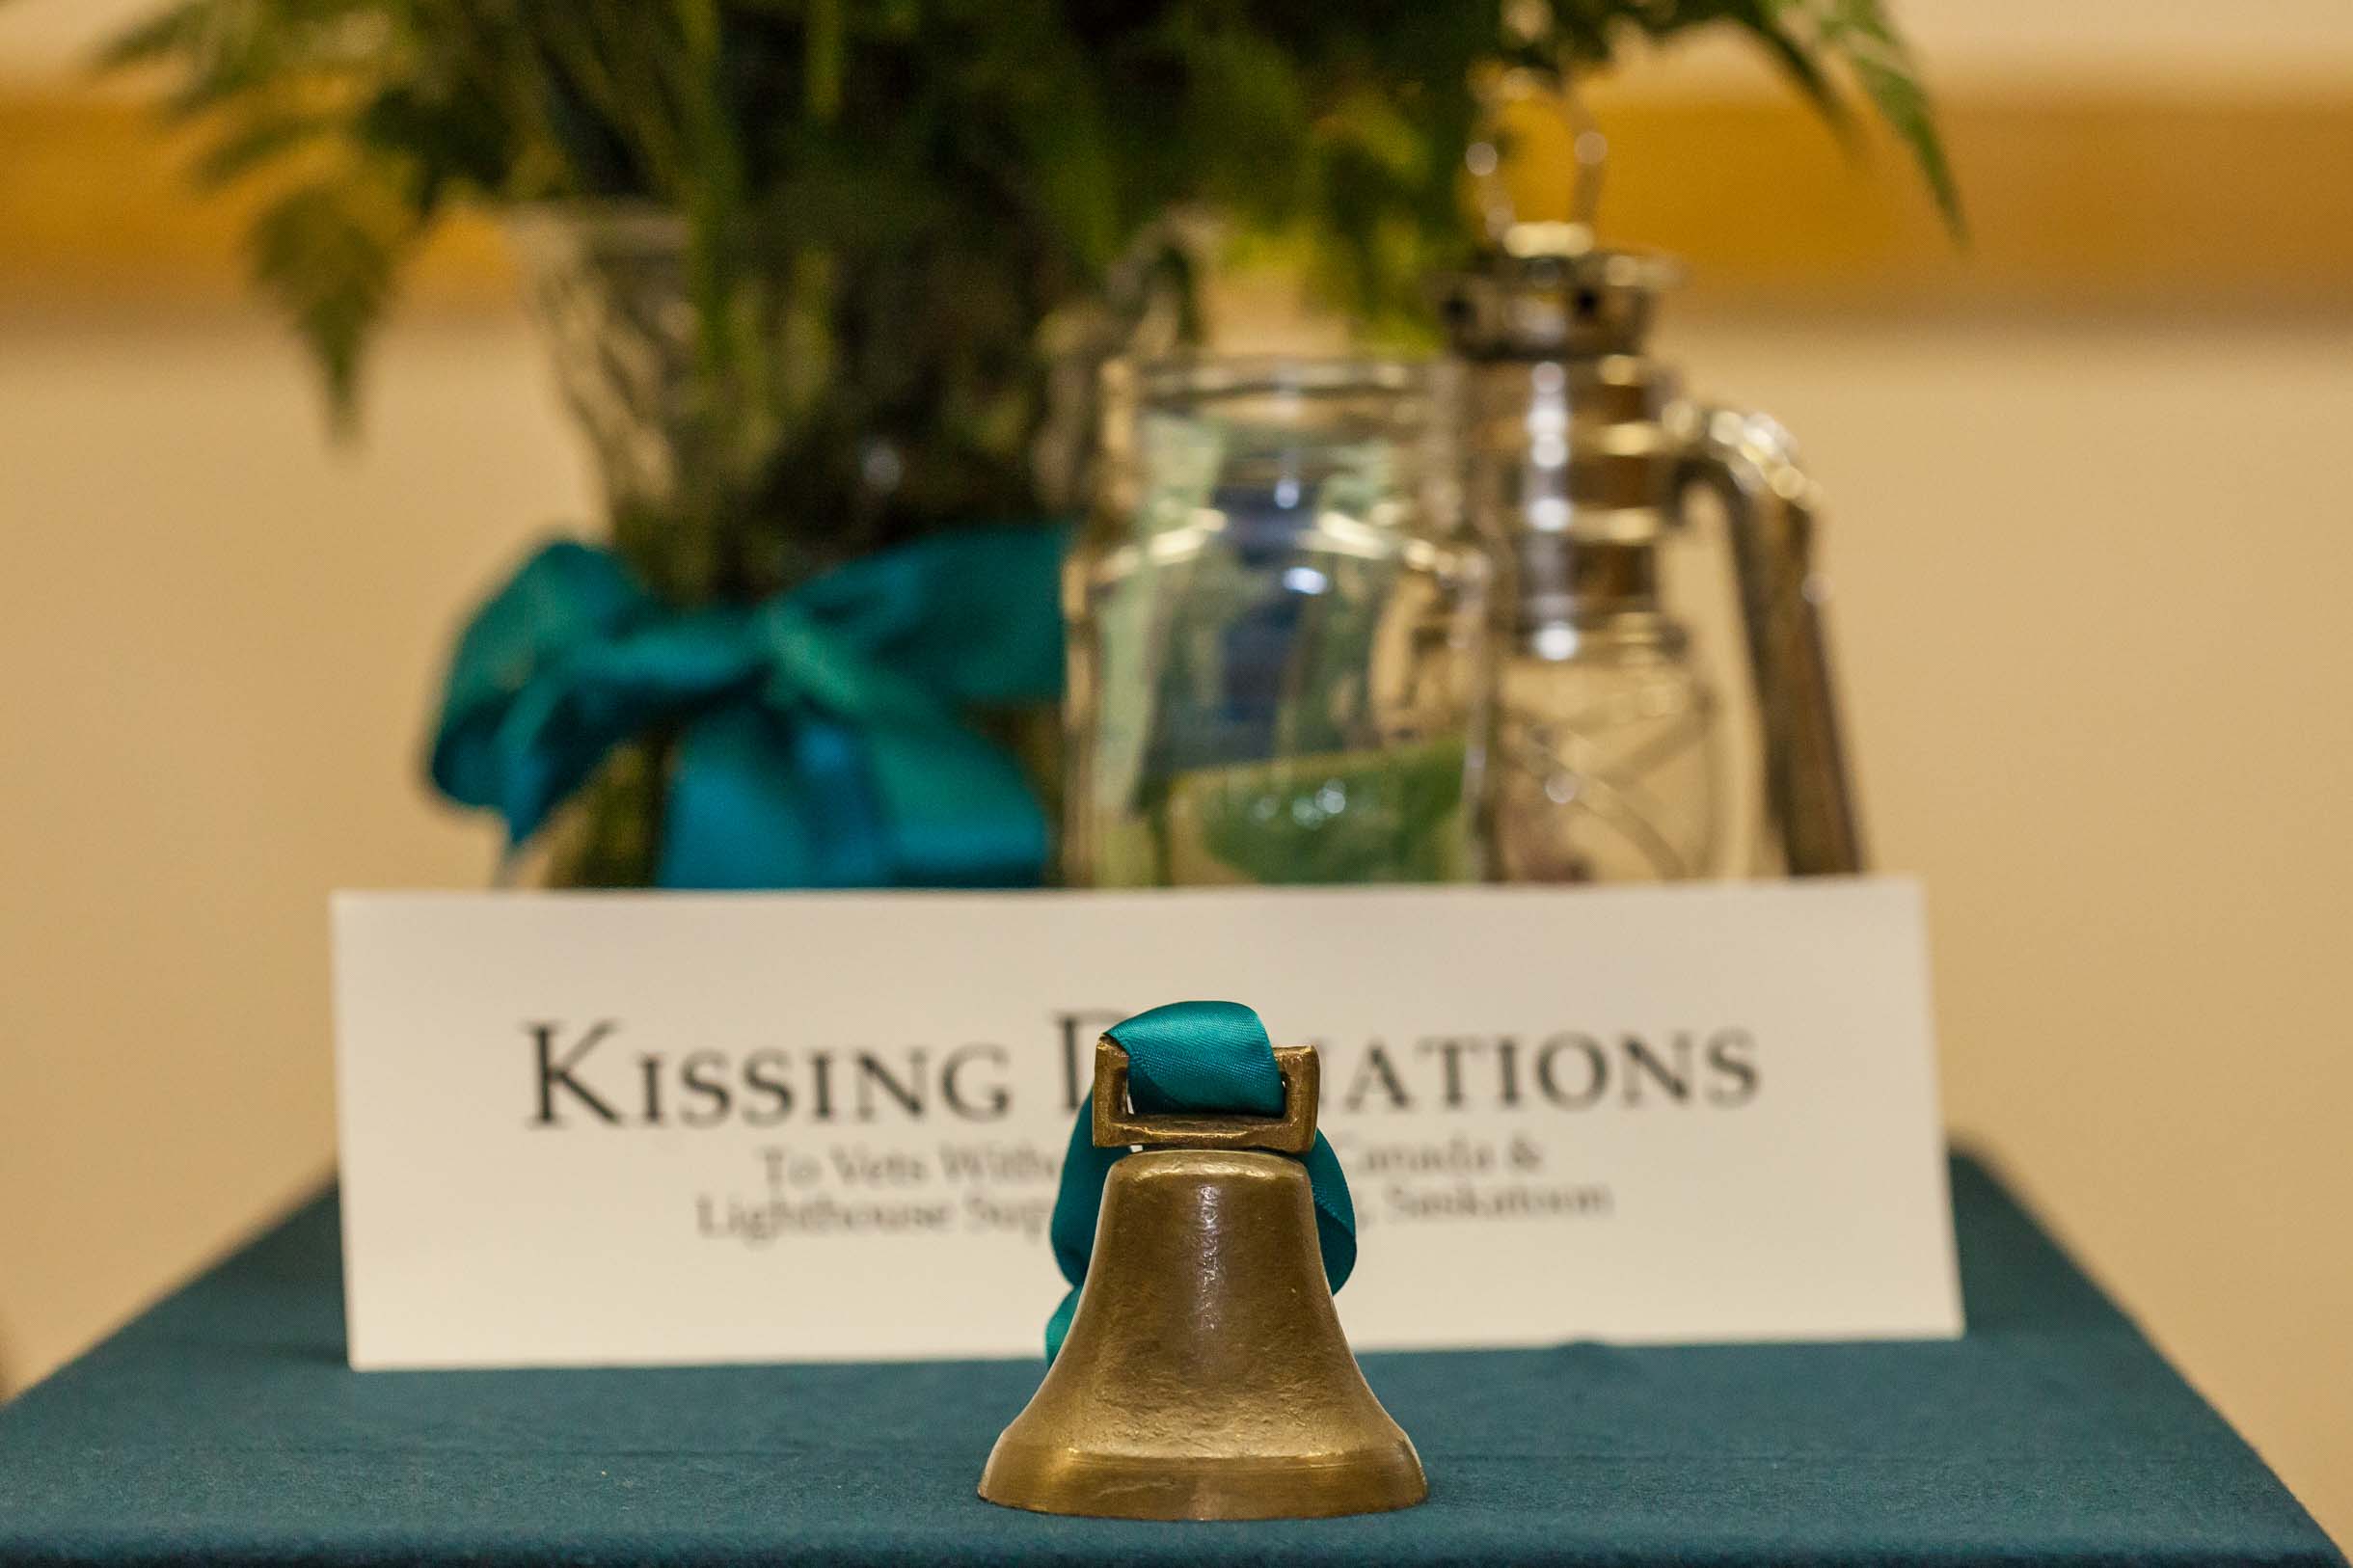 Kissing bell alternative to clicking glasses